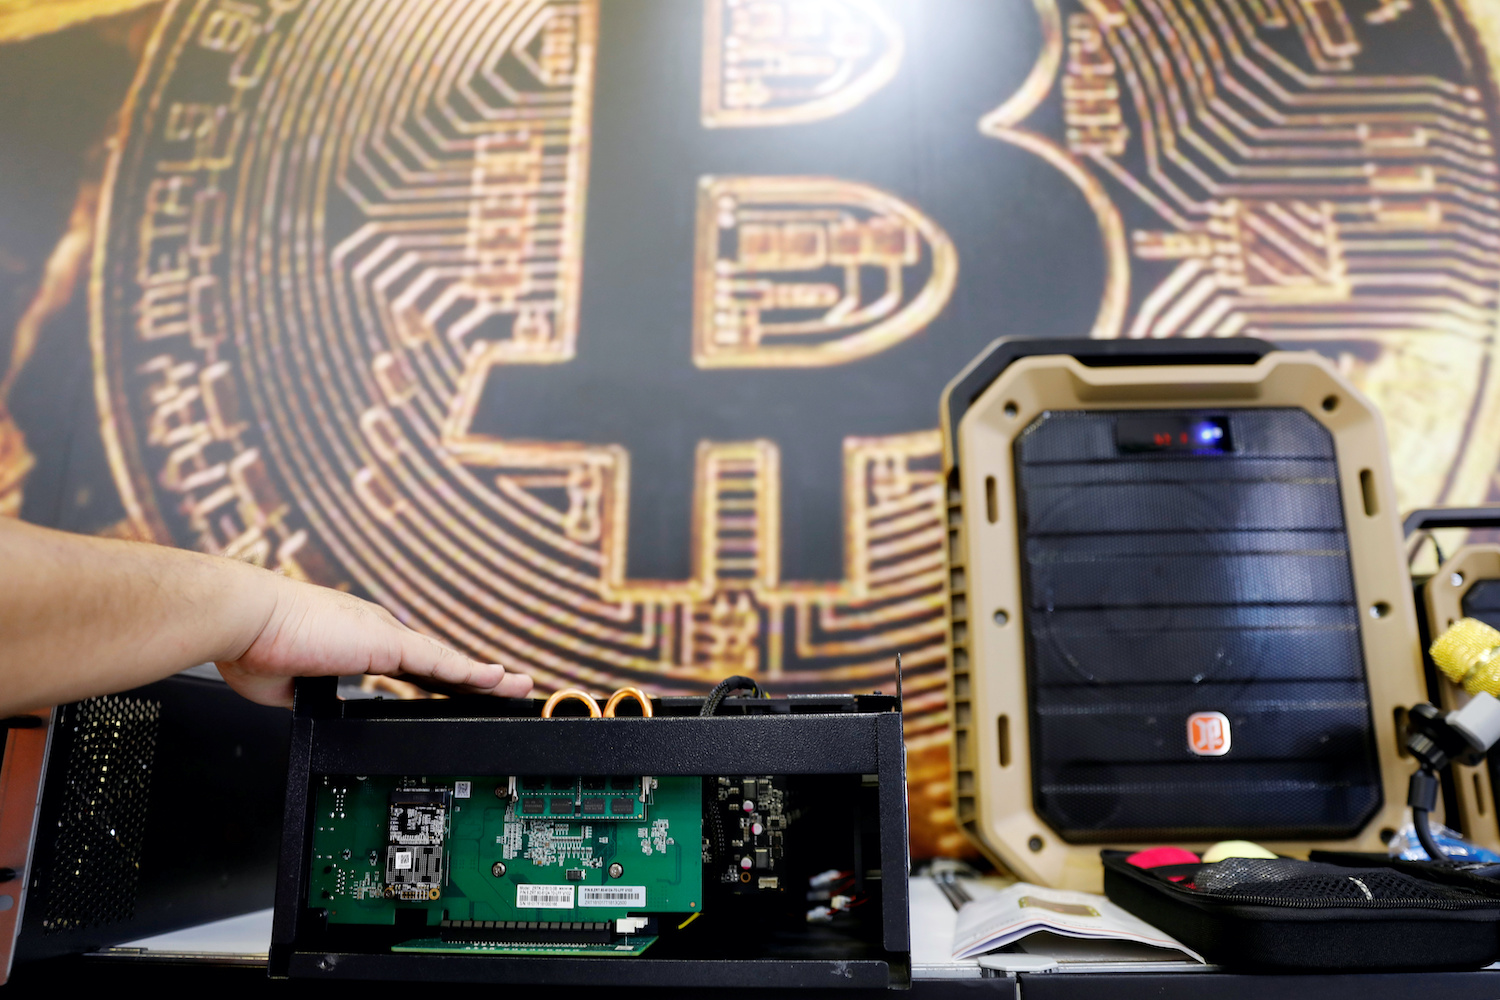 Bitcoin plunges on China mining fears and concern about regulation